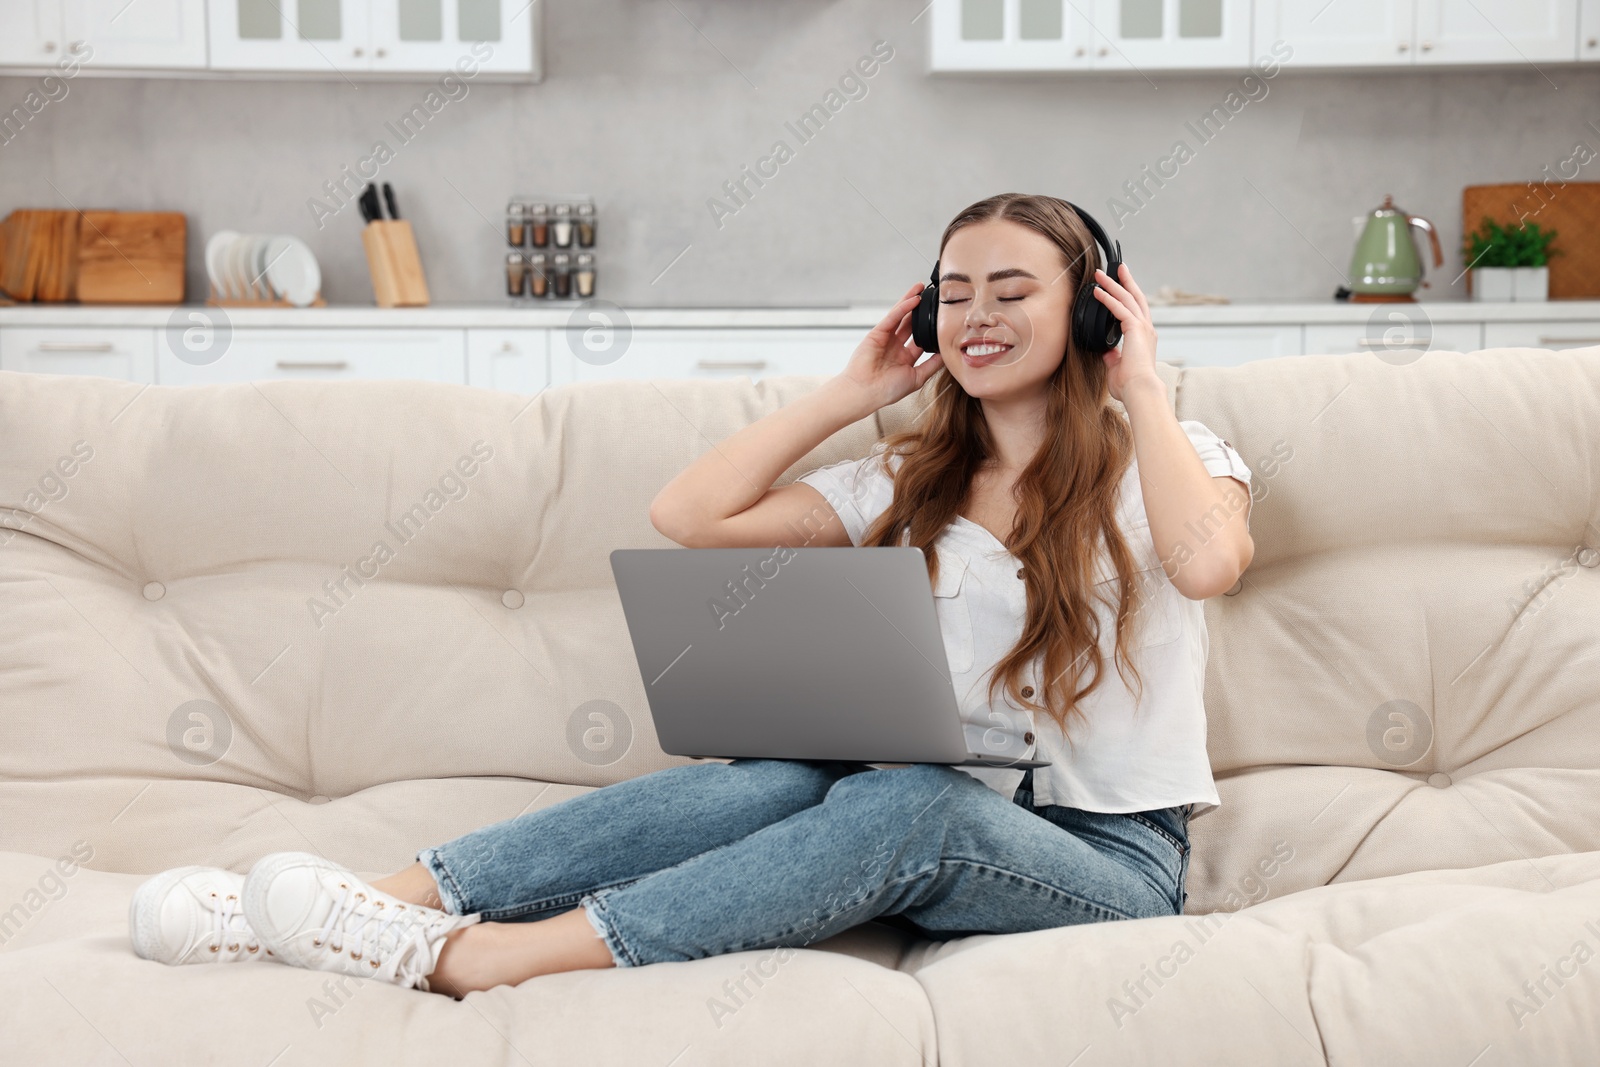 Photo of Happy woman with laptop listening to music in headphones on couch indoors